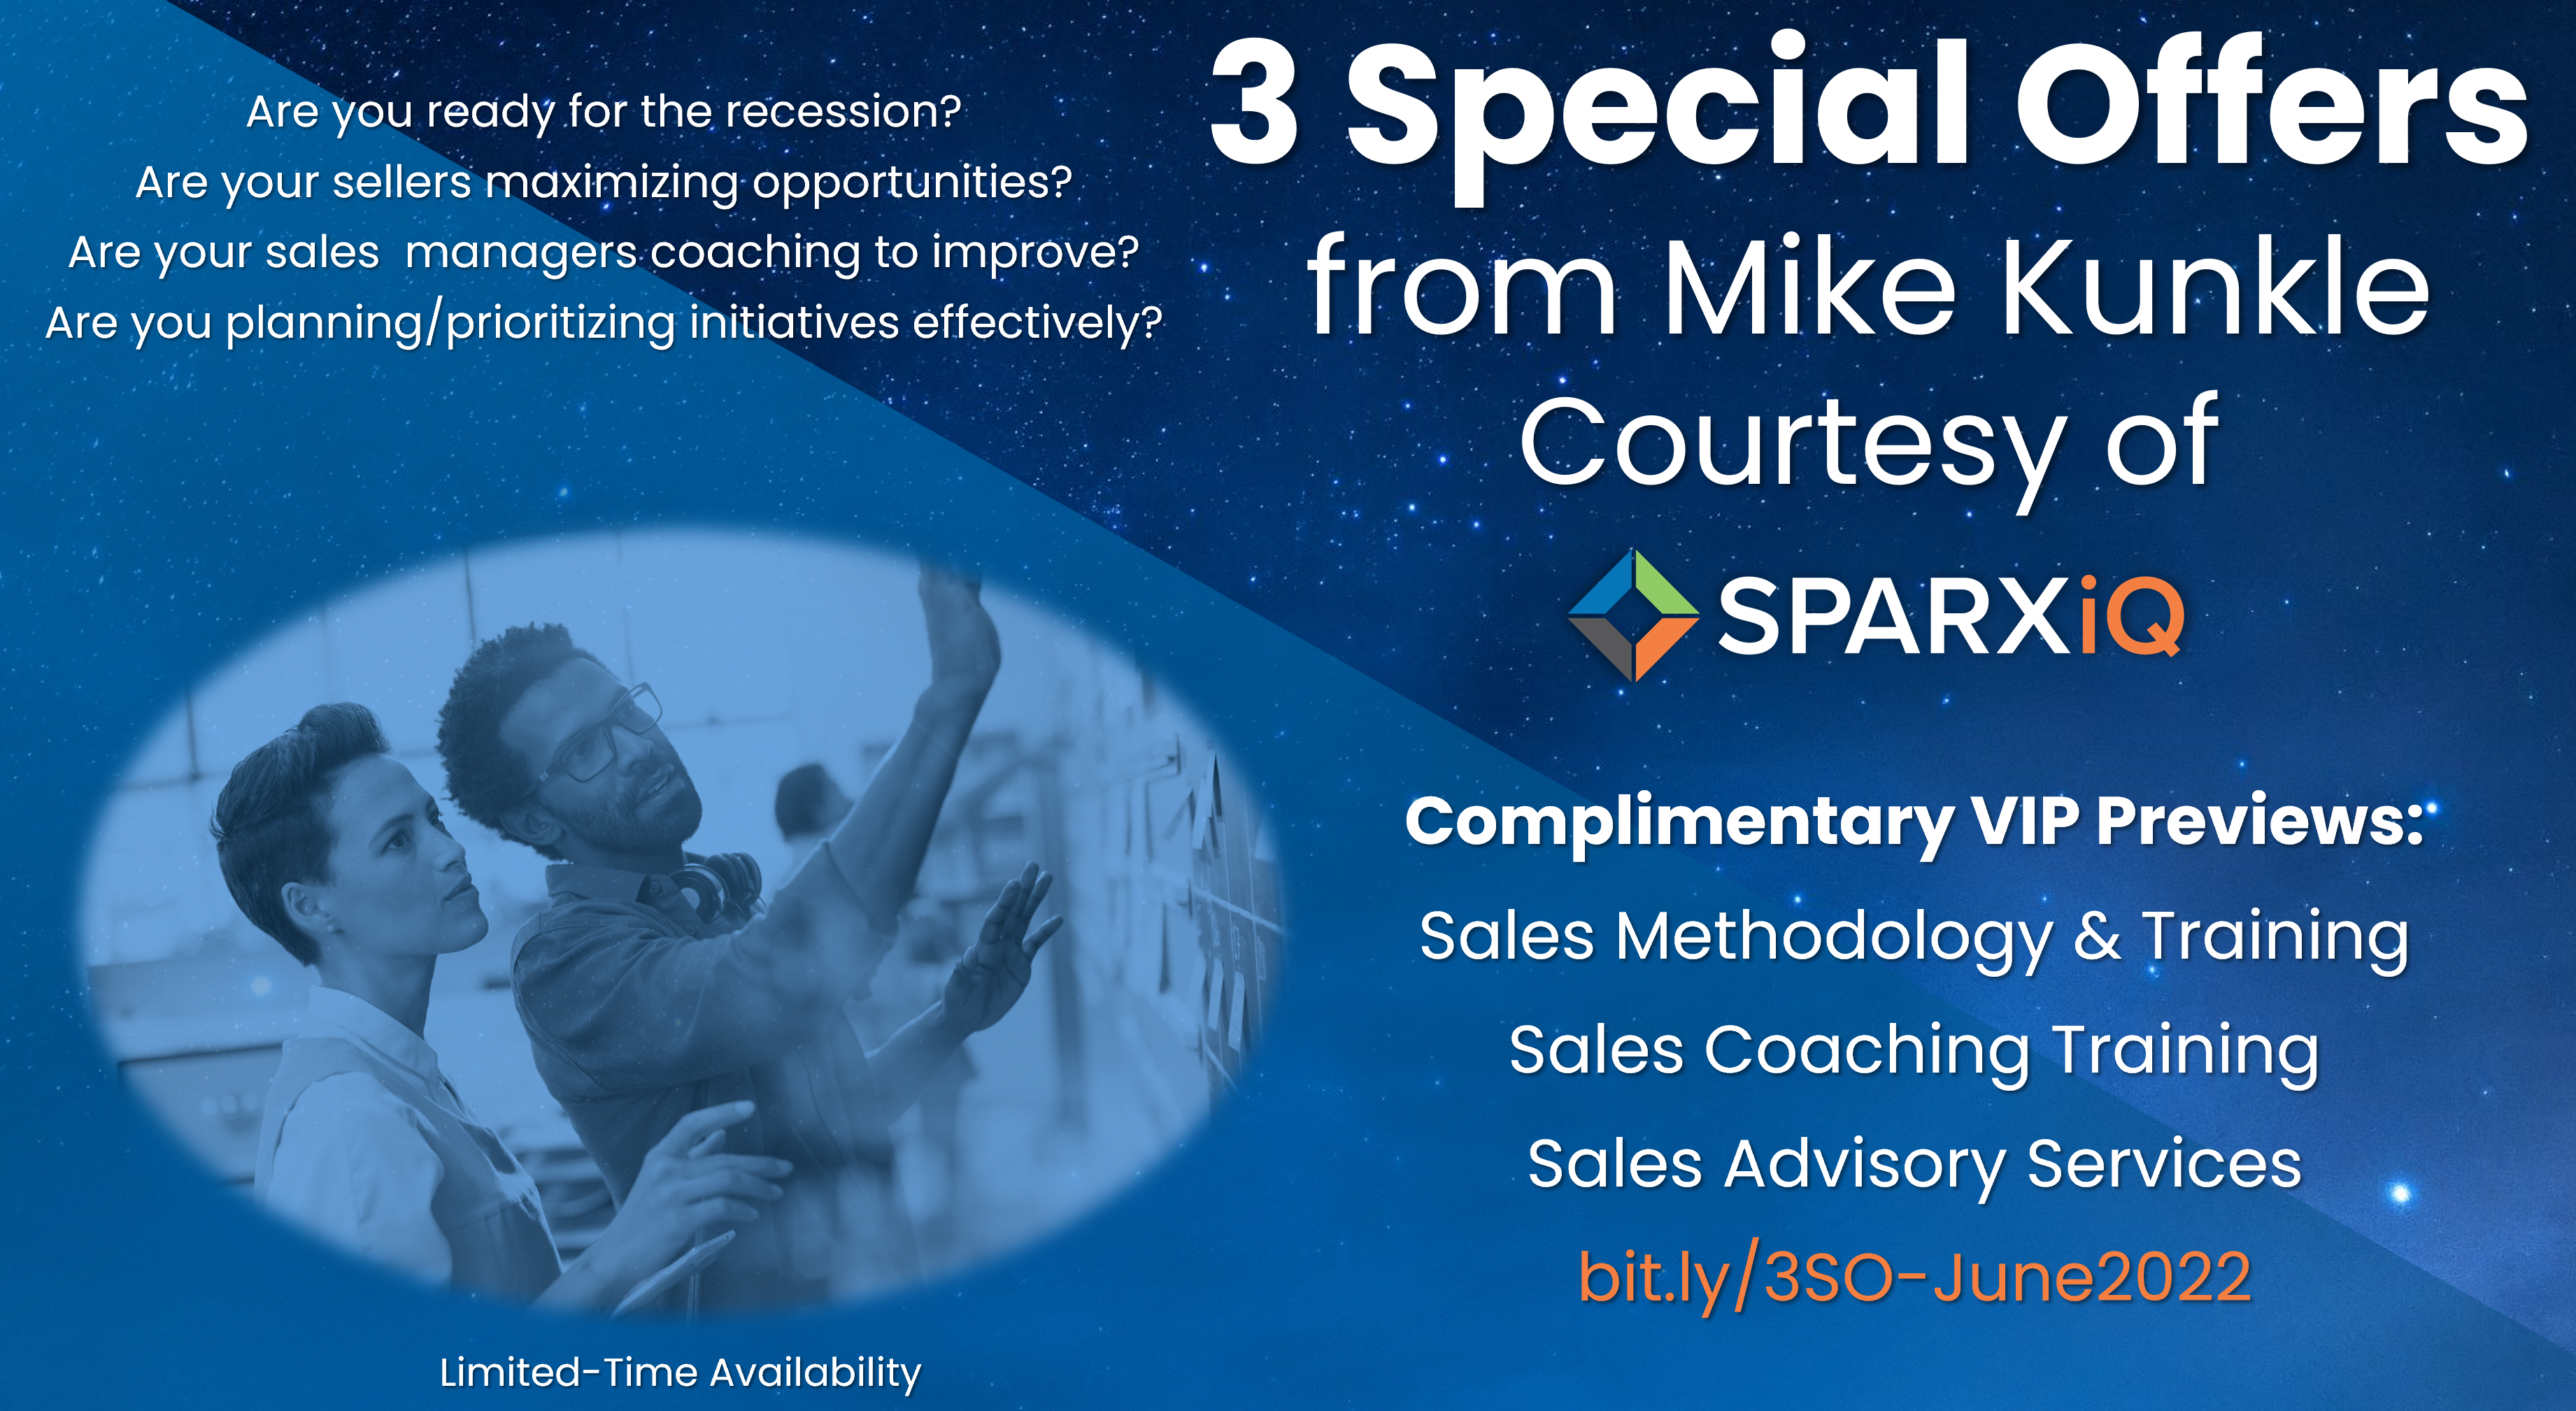 3 Special Offer from Mike Kunkle